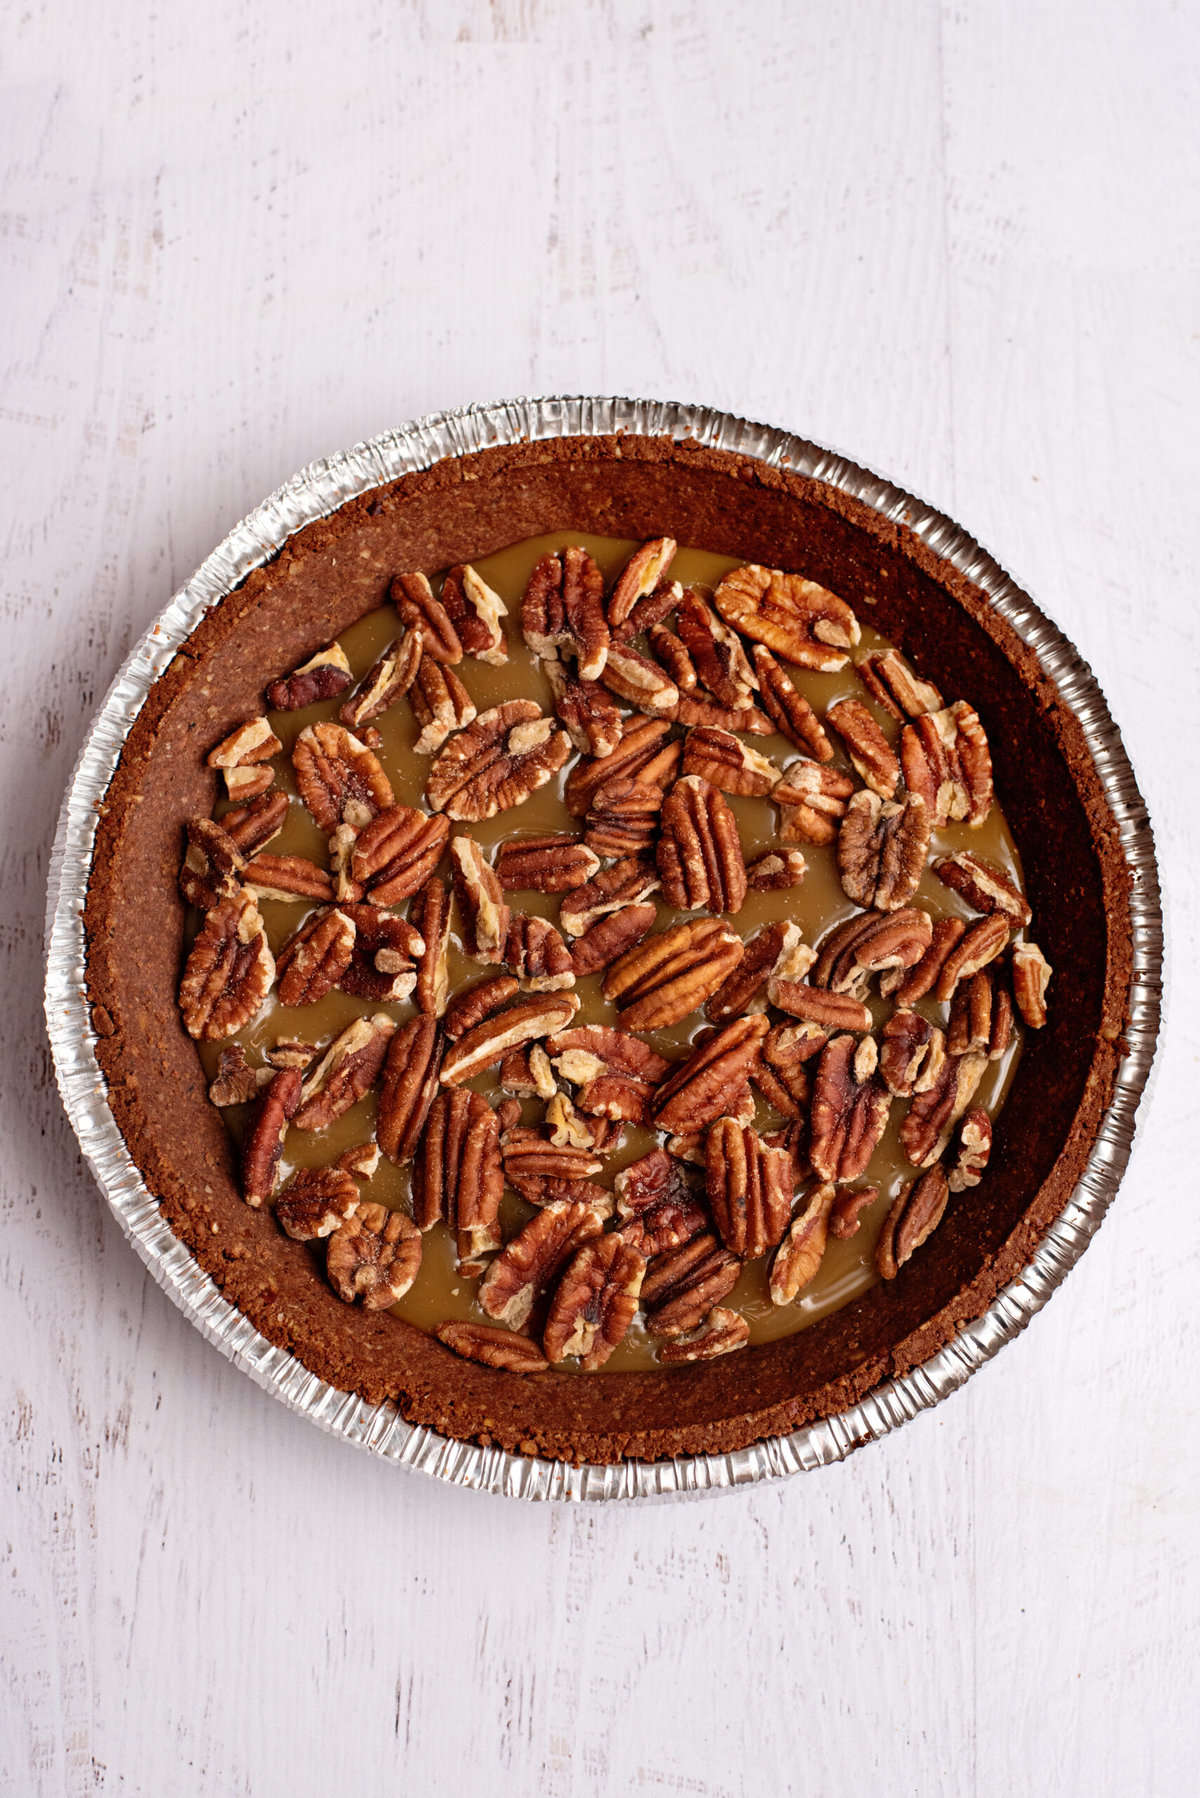 sprinkle pecans over the caramel in the frozen turtle pie